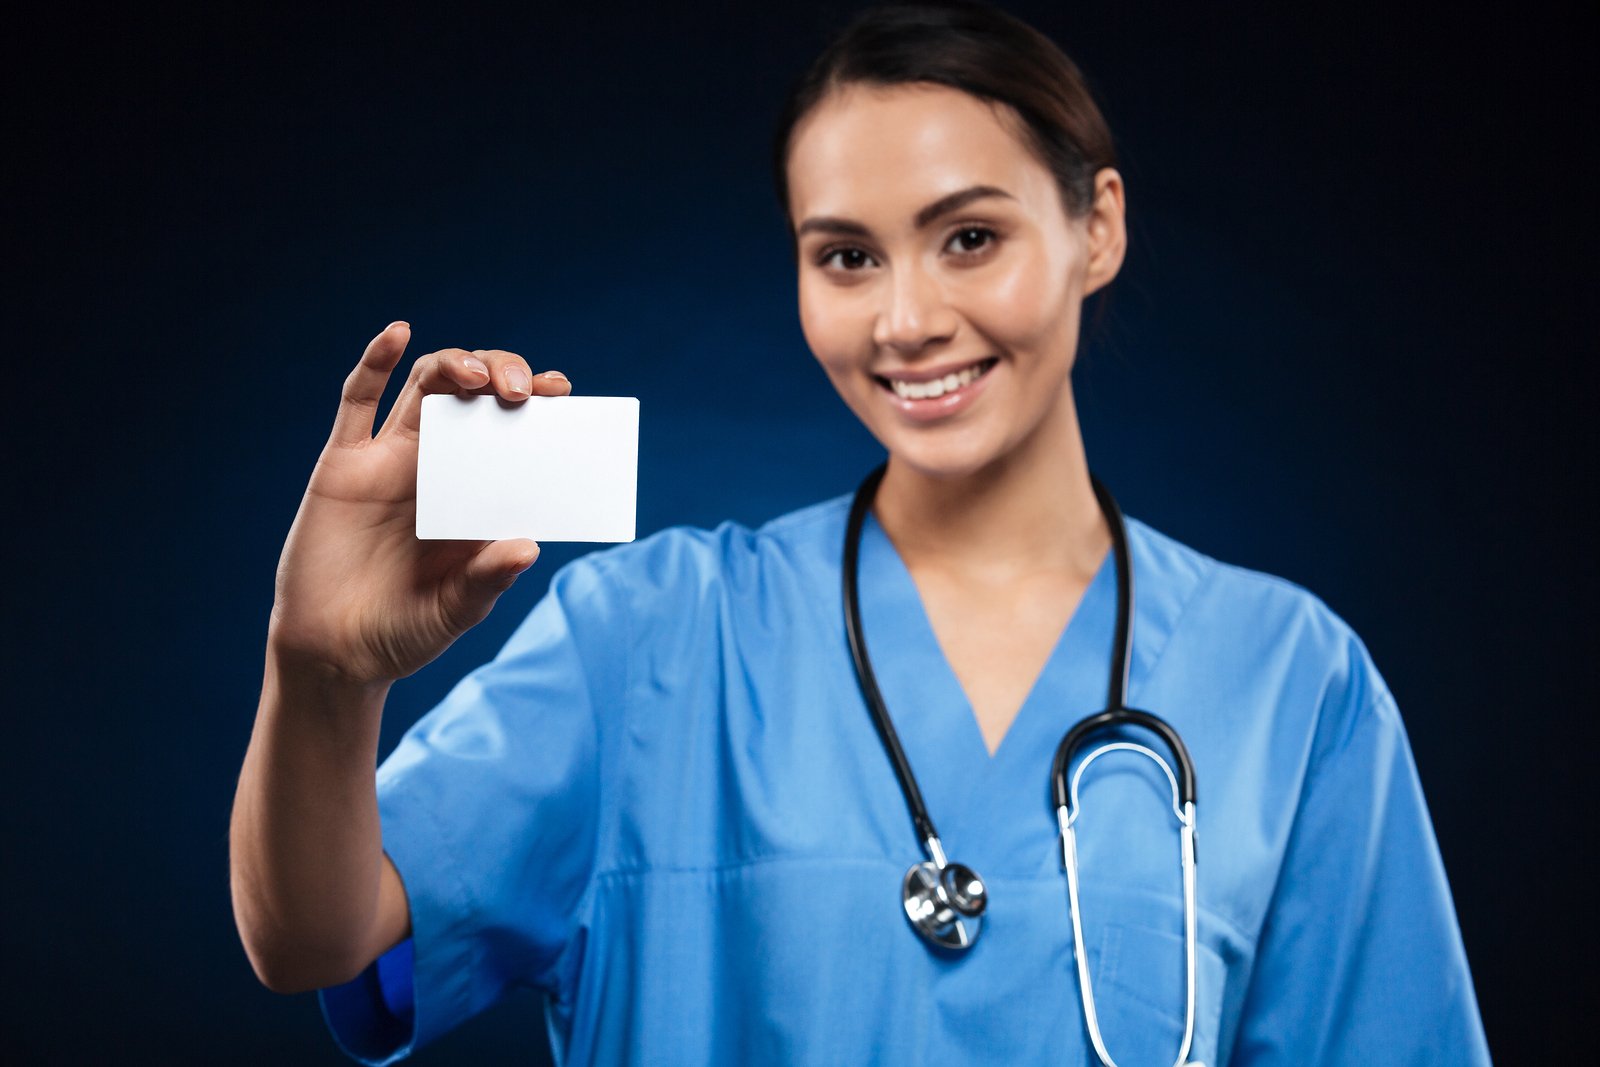 clinical research certification for nurses